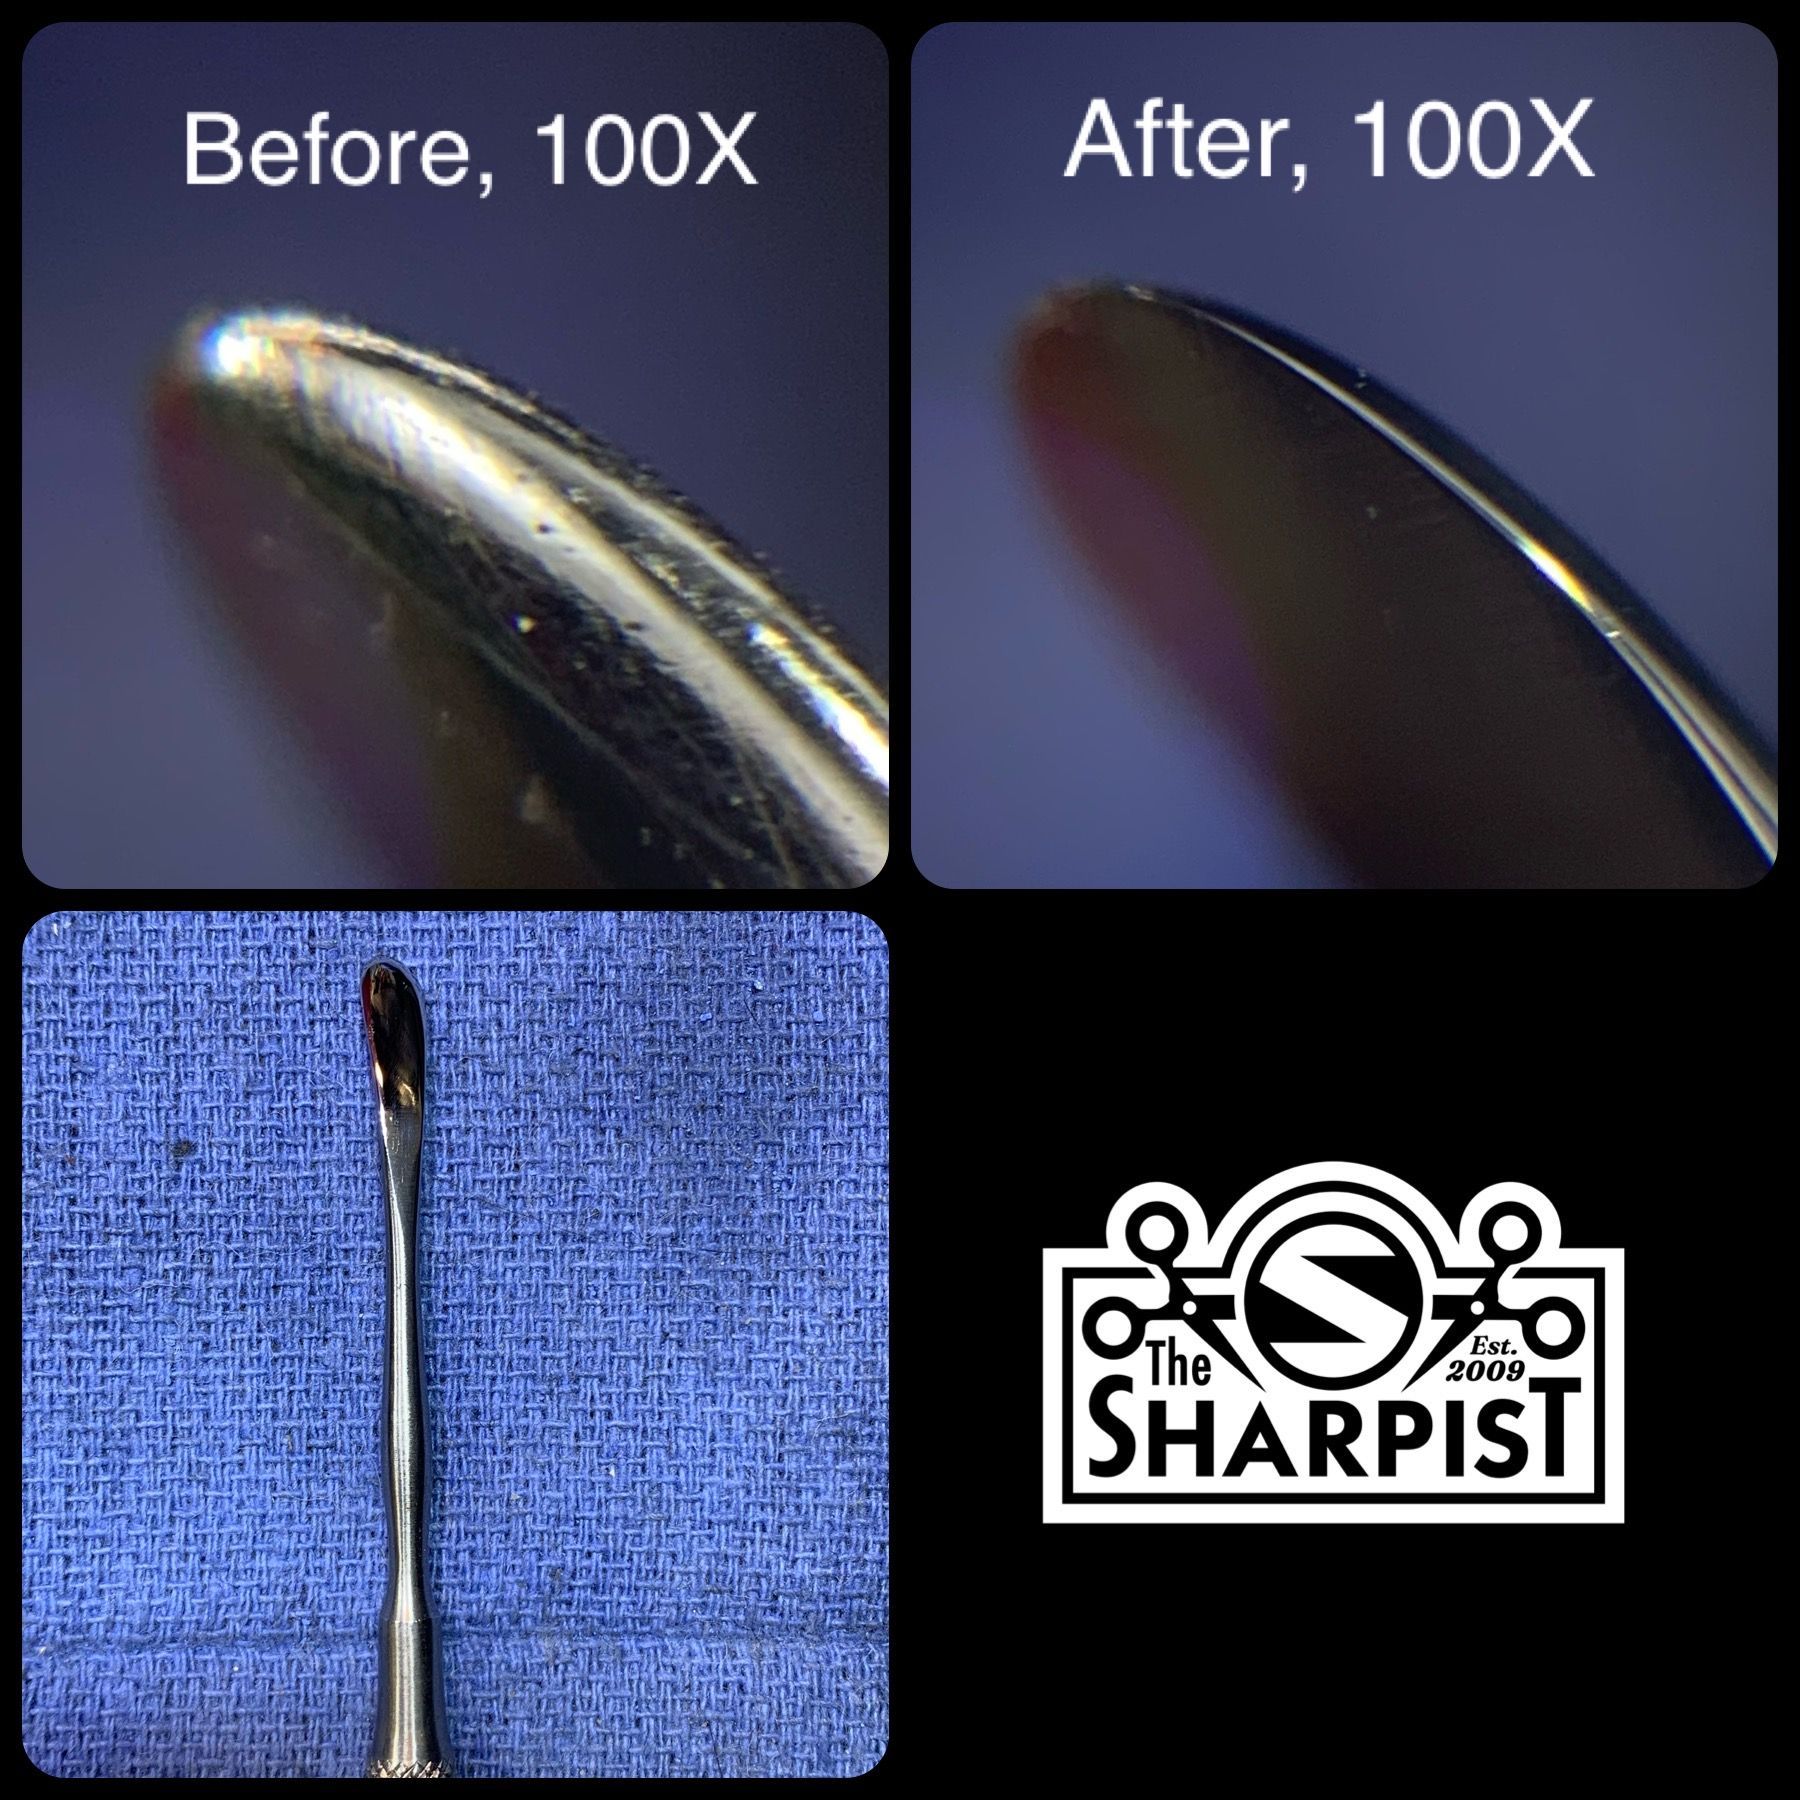 The Sharpist provides surgical instrument sharpening by mail, and offers mobile visits to Denver area surgical centers.